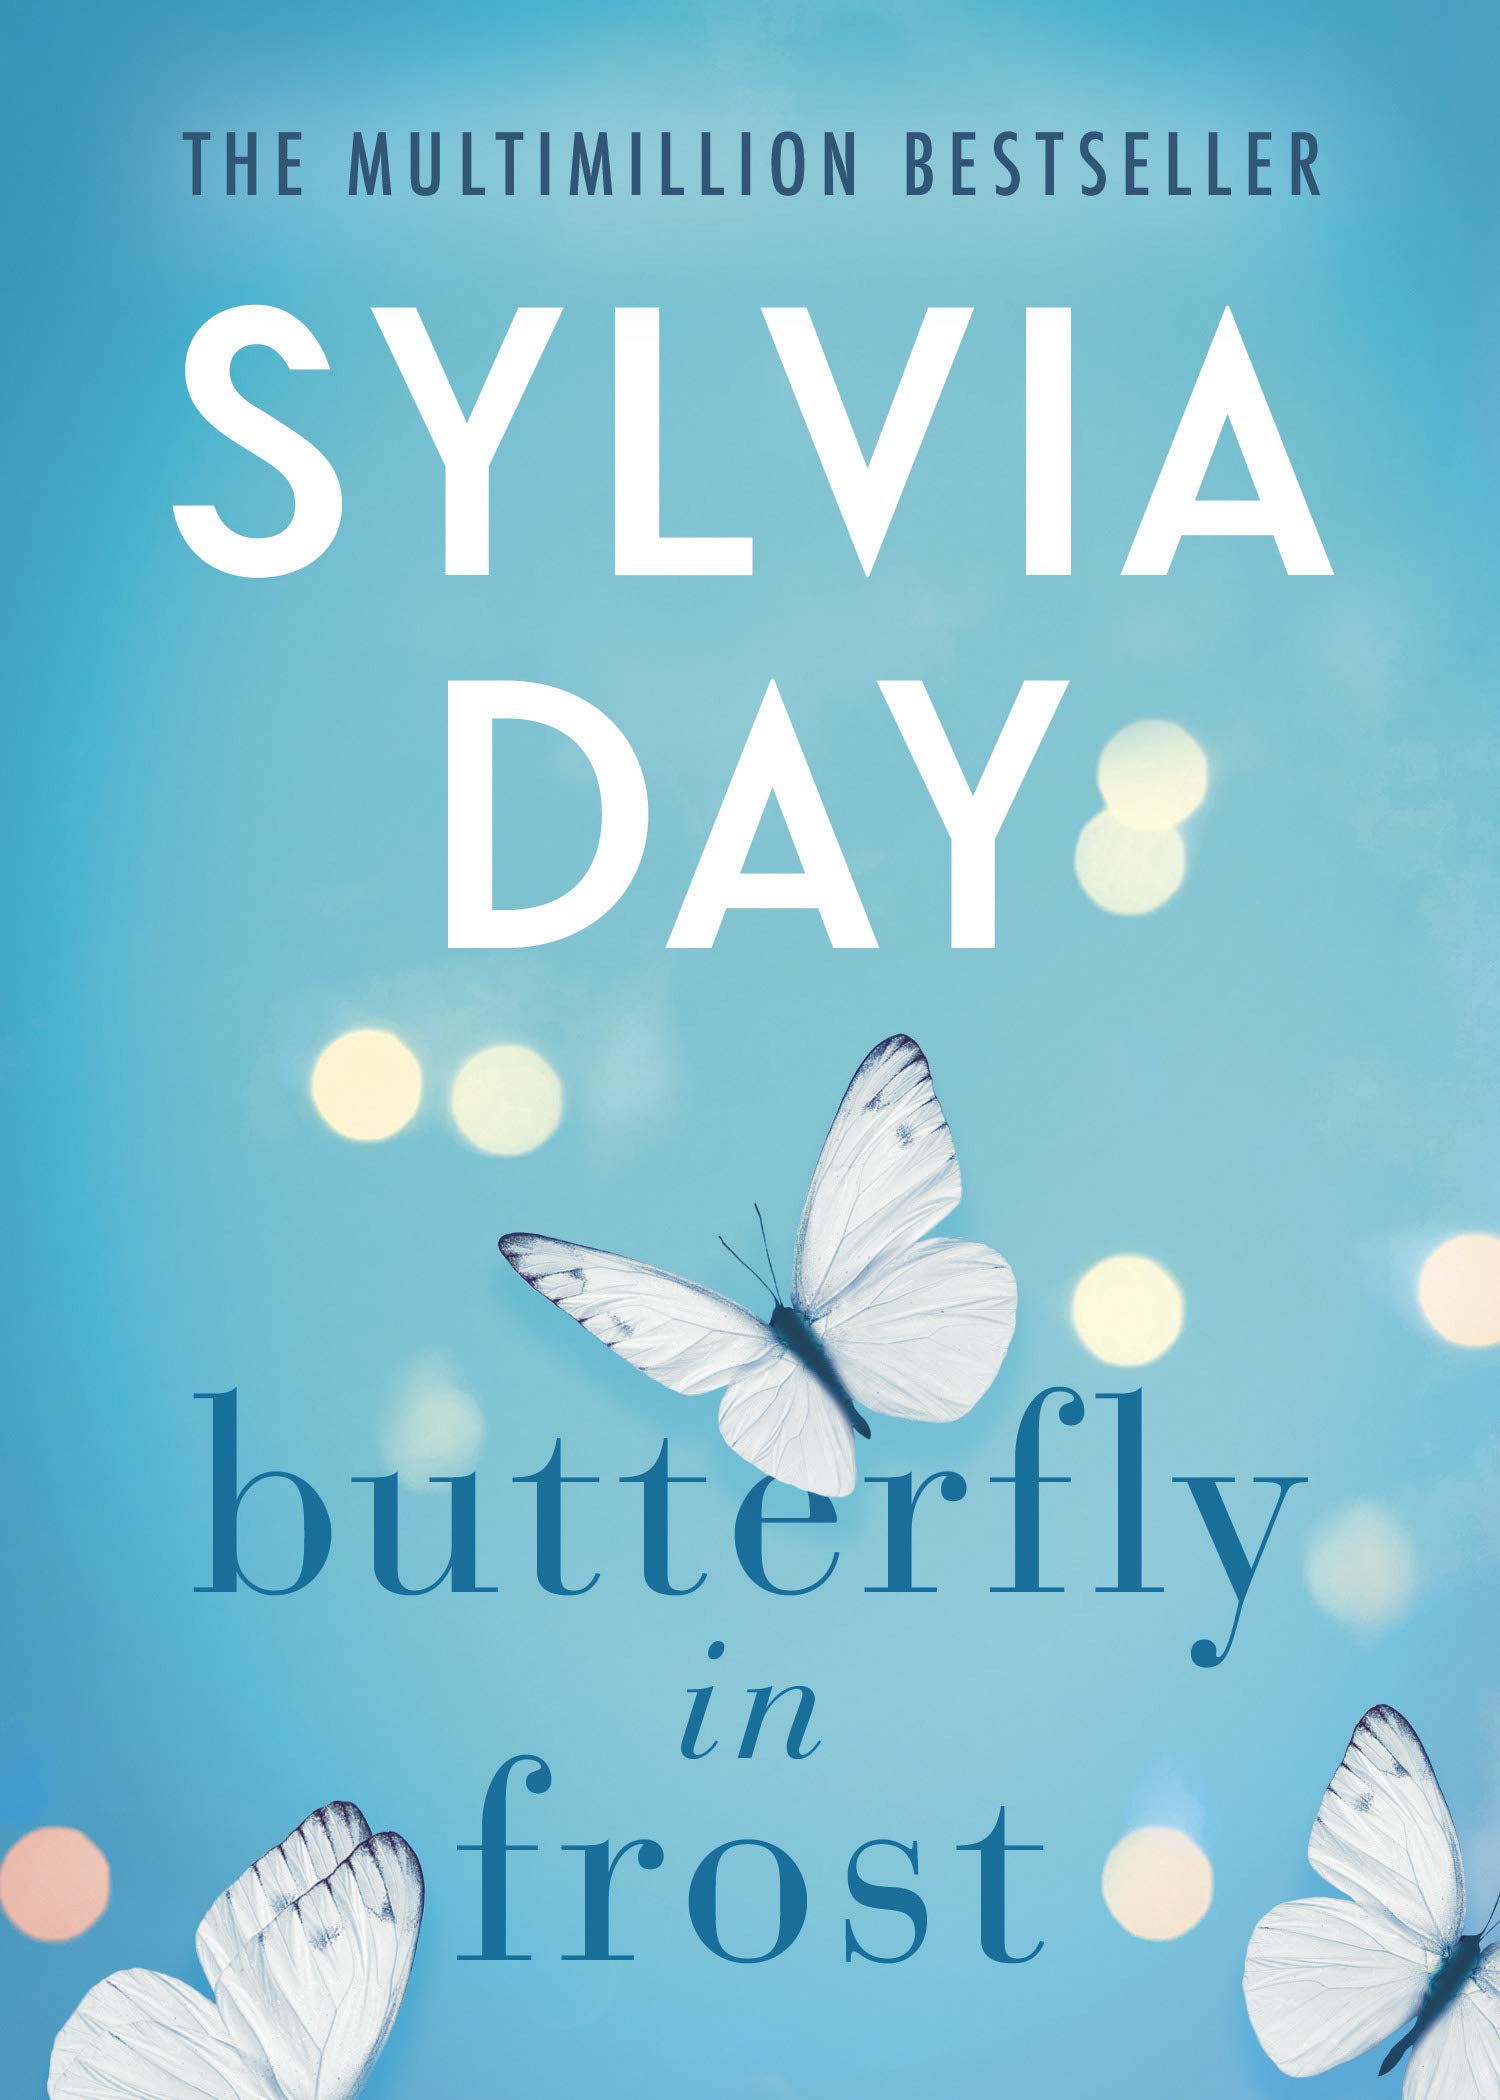 Butterfly in Frost Book Release Date? 2019 Romance Releases